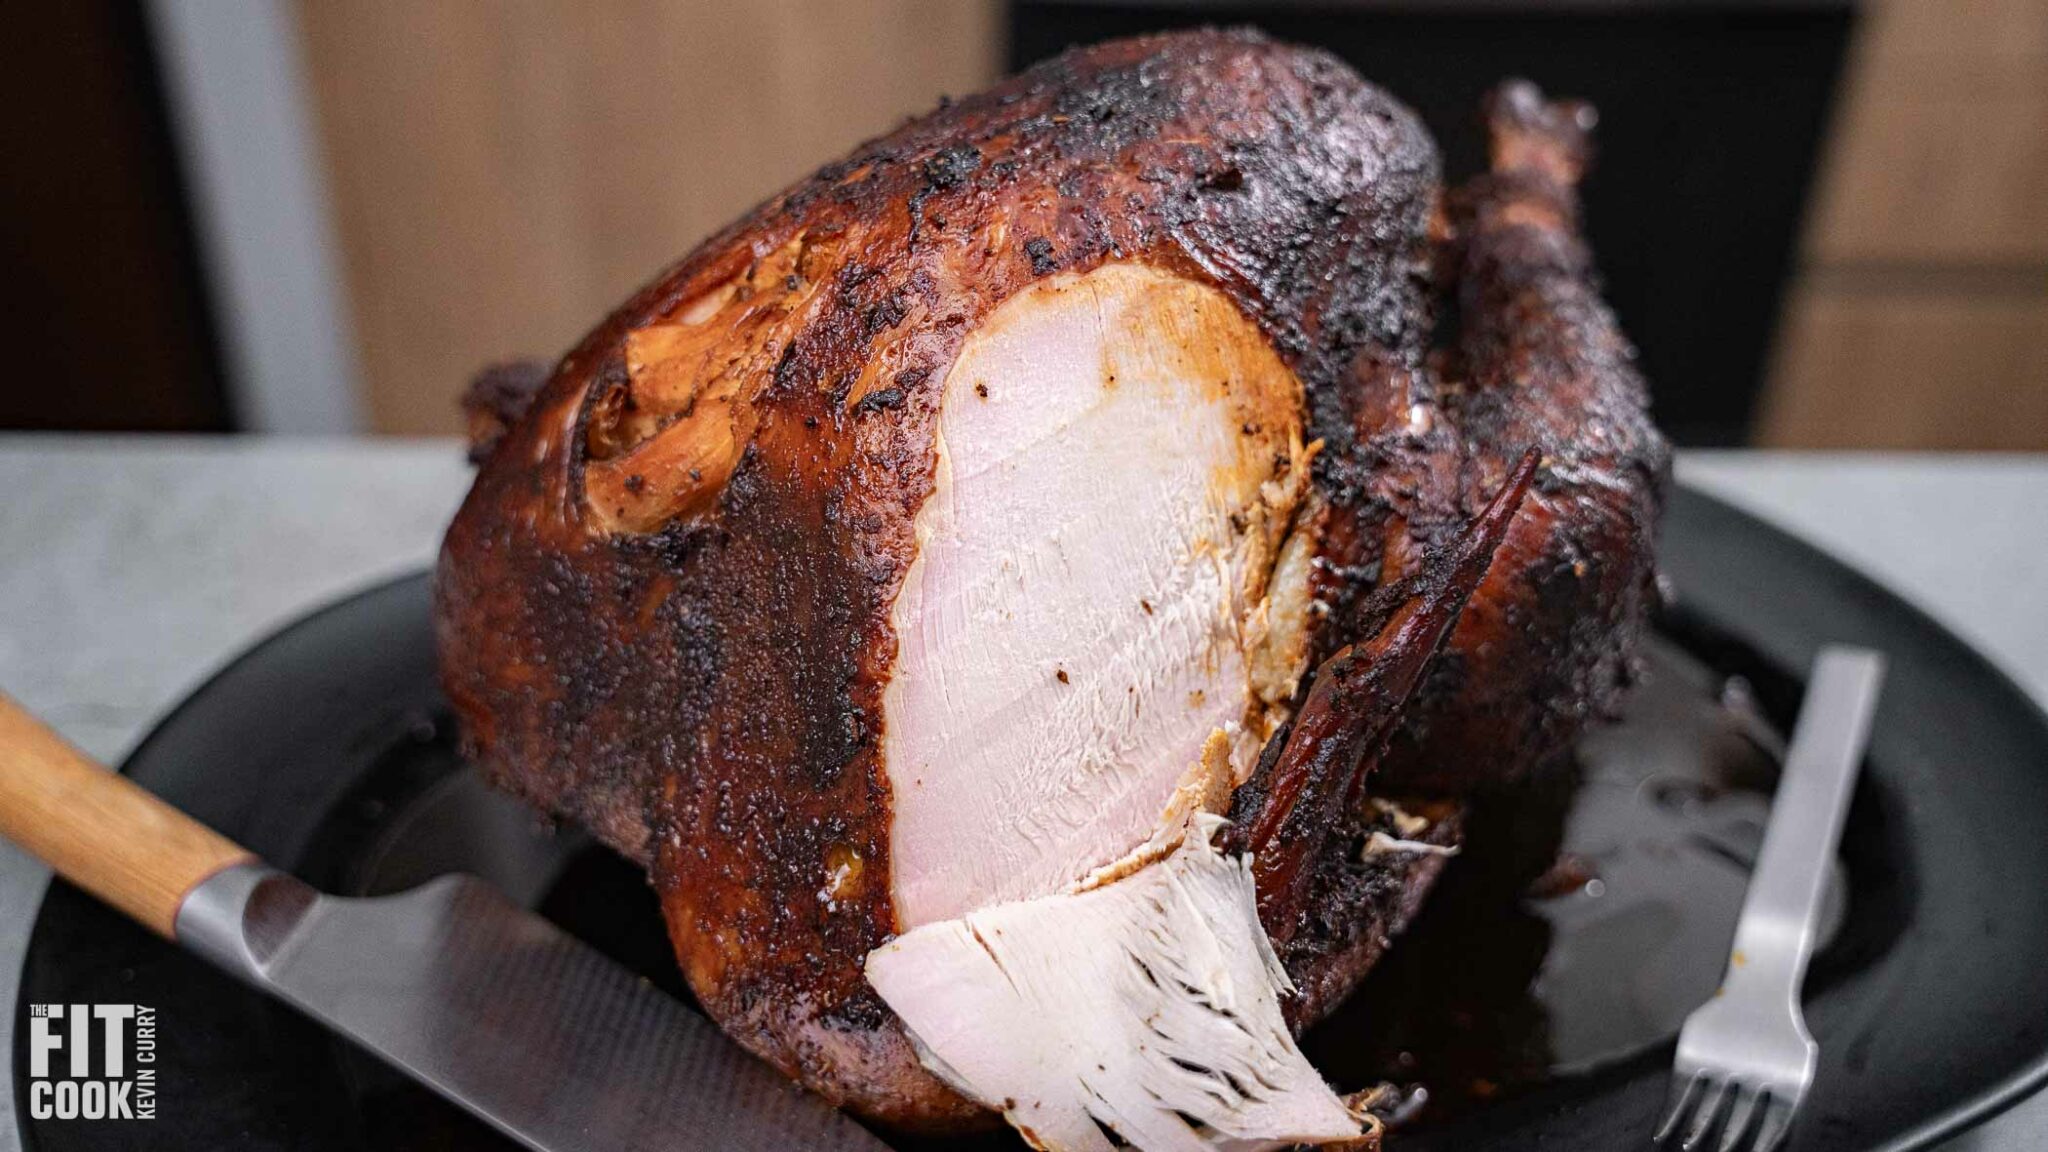 Tips on how to Smoke Turkey & Dry Brine (or Poultry)